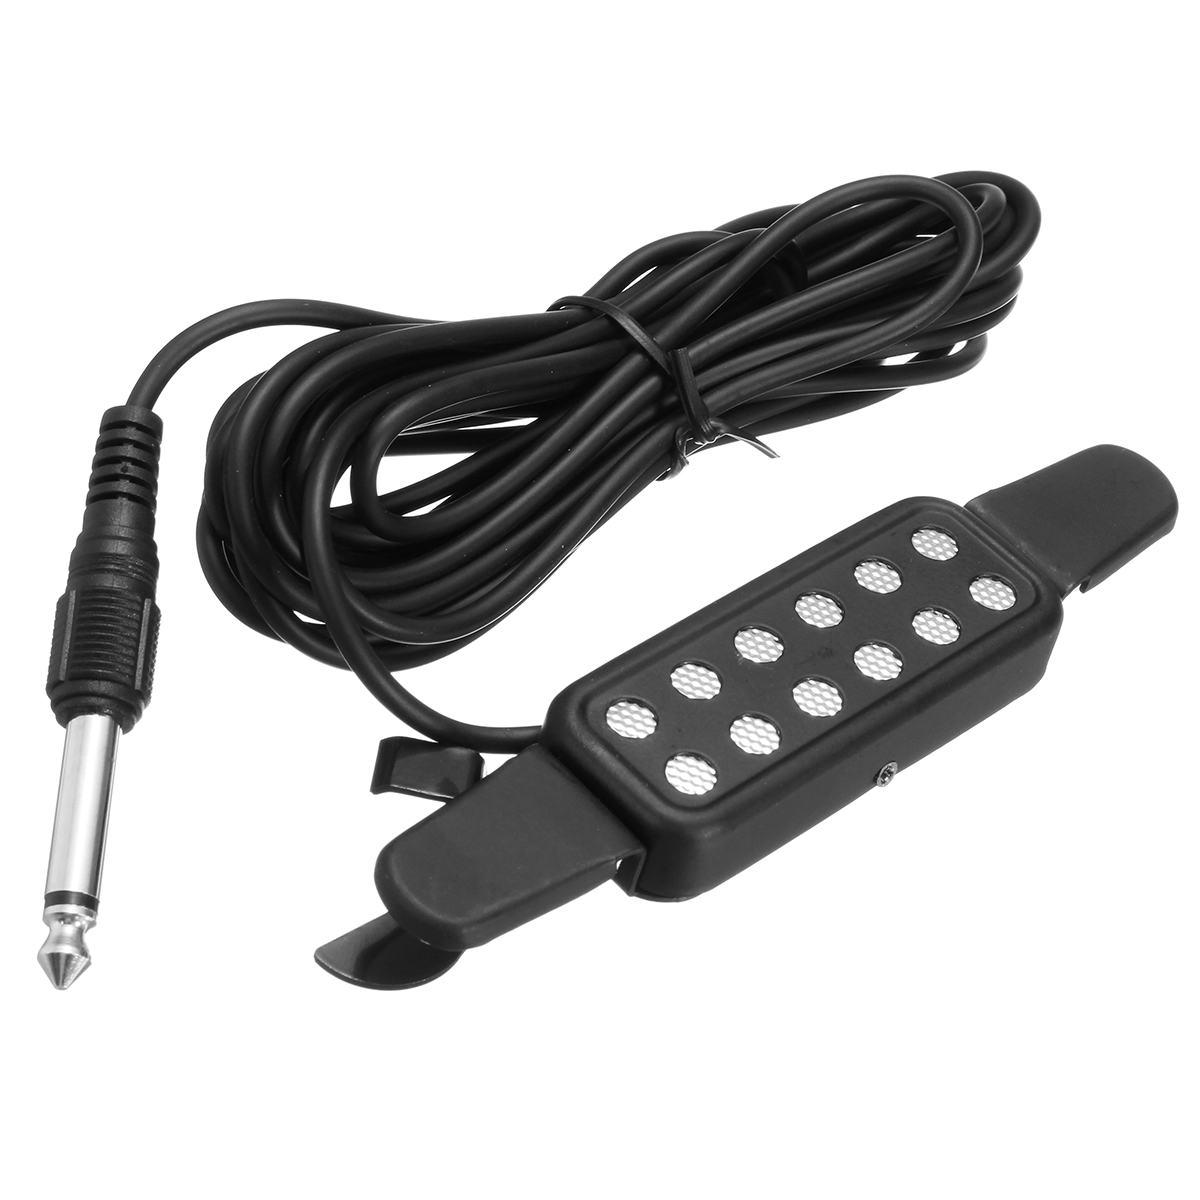 12-Hole-Sound-Pickup-Microphone-Amplifier-Speaker-for-Acoustic-Guitar-1340713